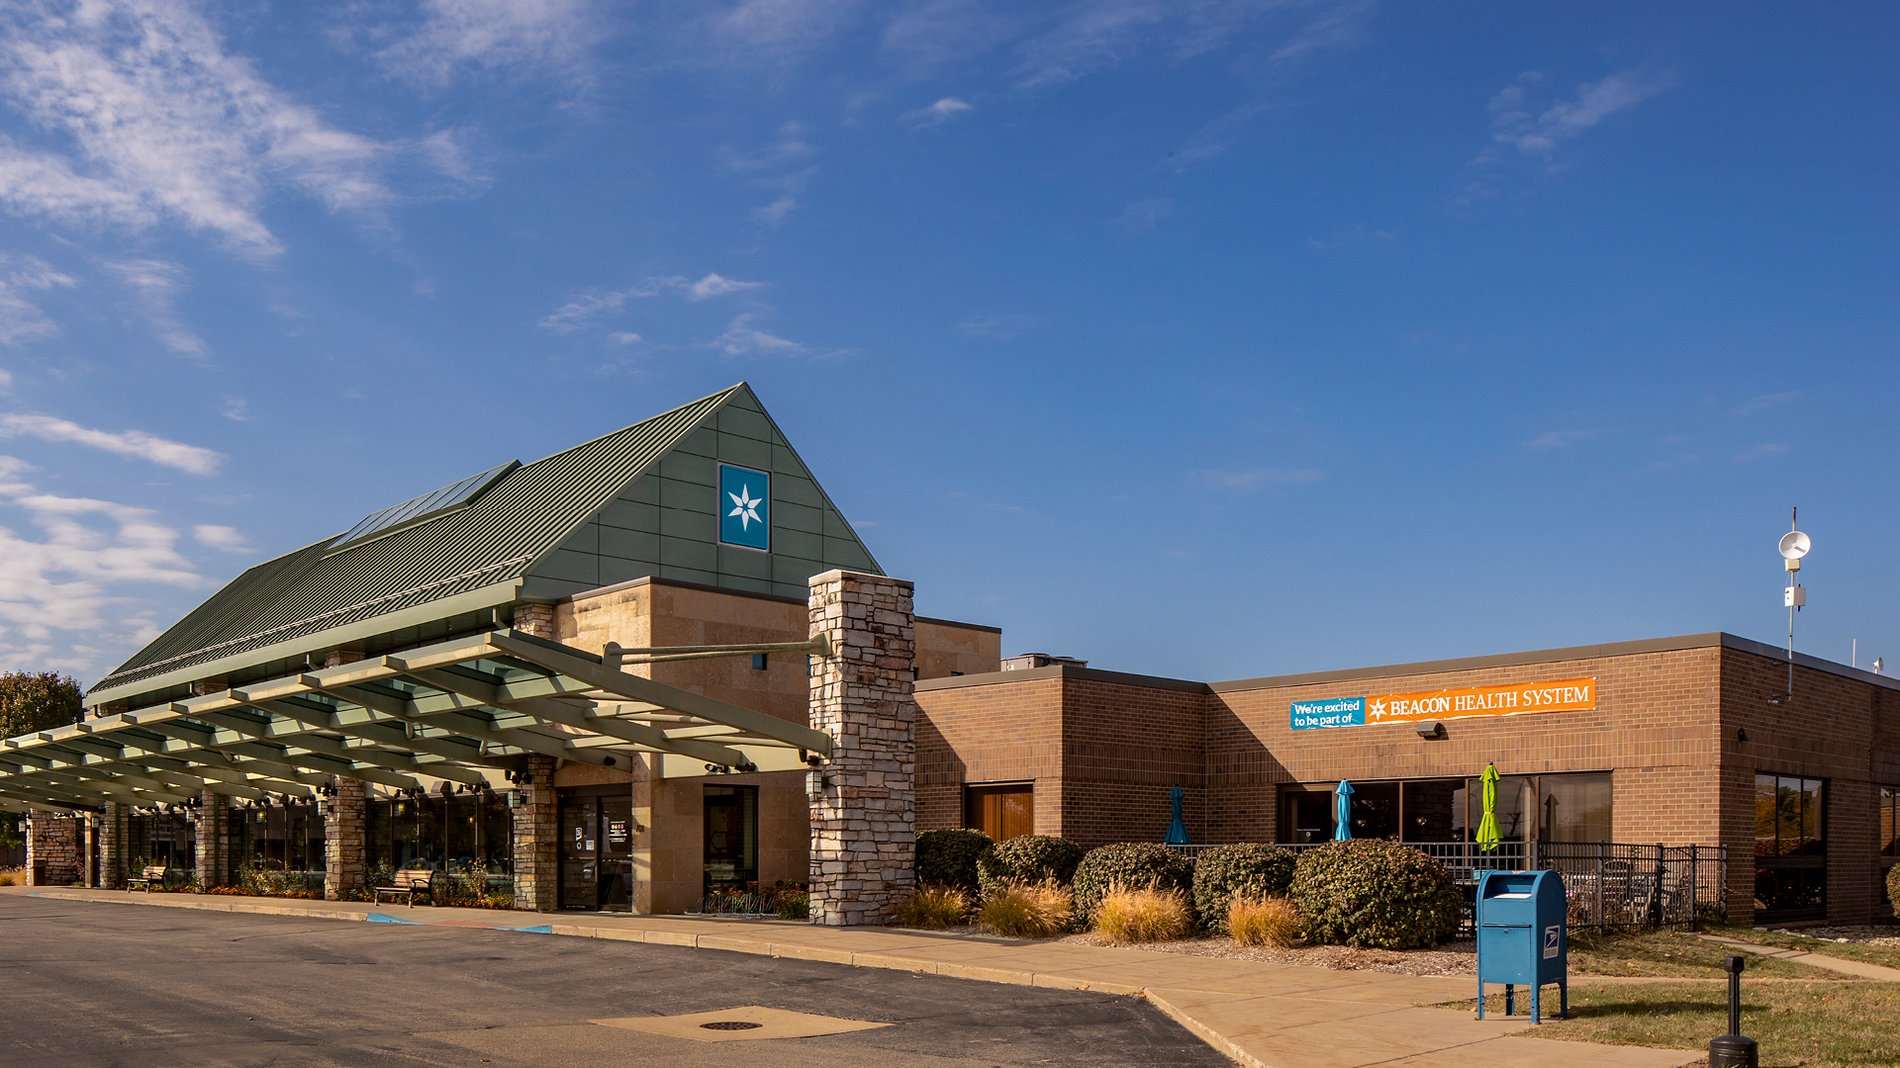 The entrance to Three Rivers Health Hospital has an overhang and a sign that reads, "We're excited to be part of Beacon Health System."